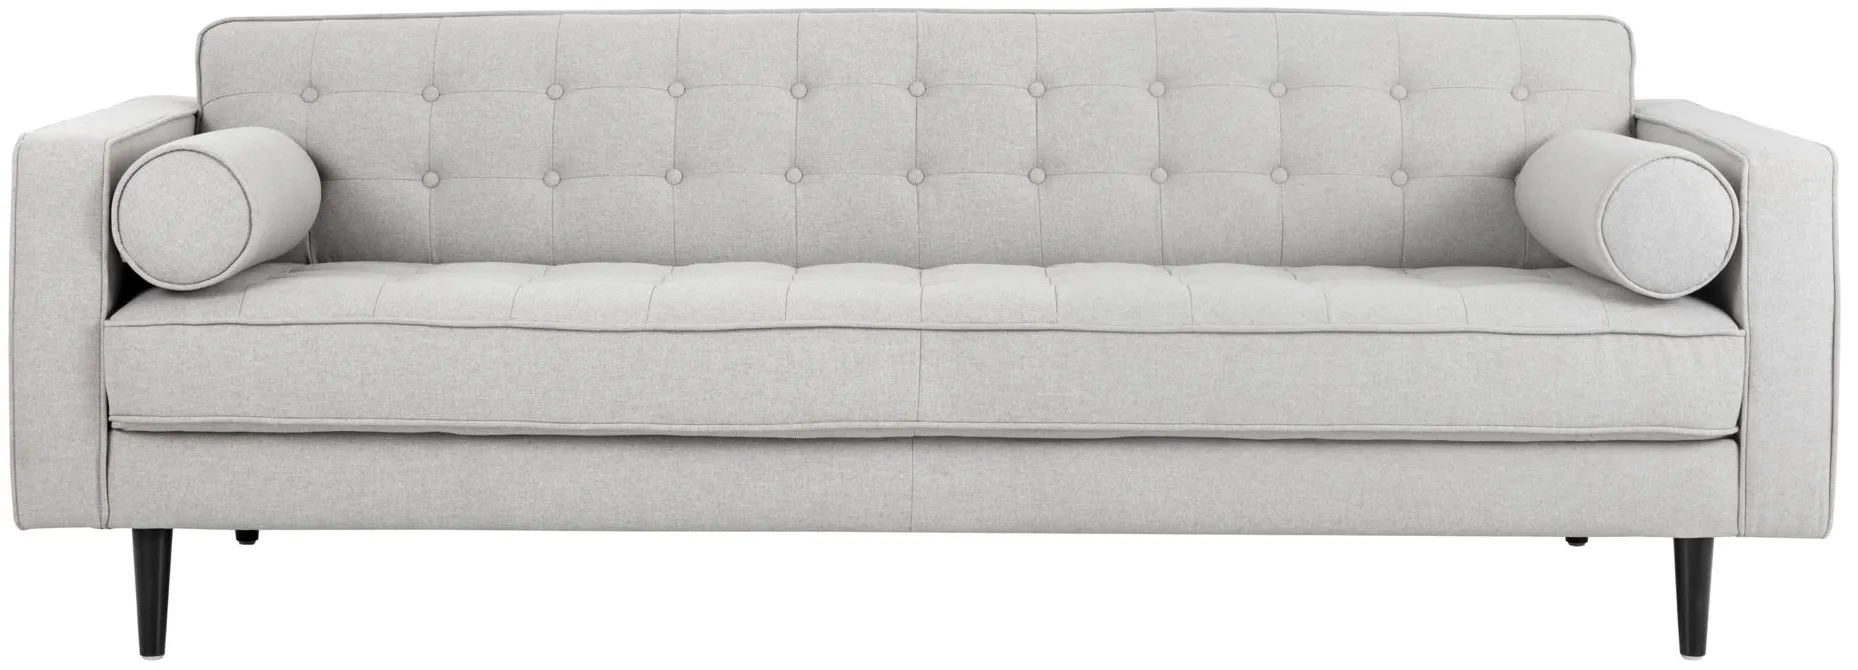 Donnie Sofa in Gray by Sunpan